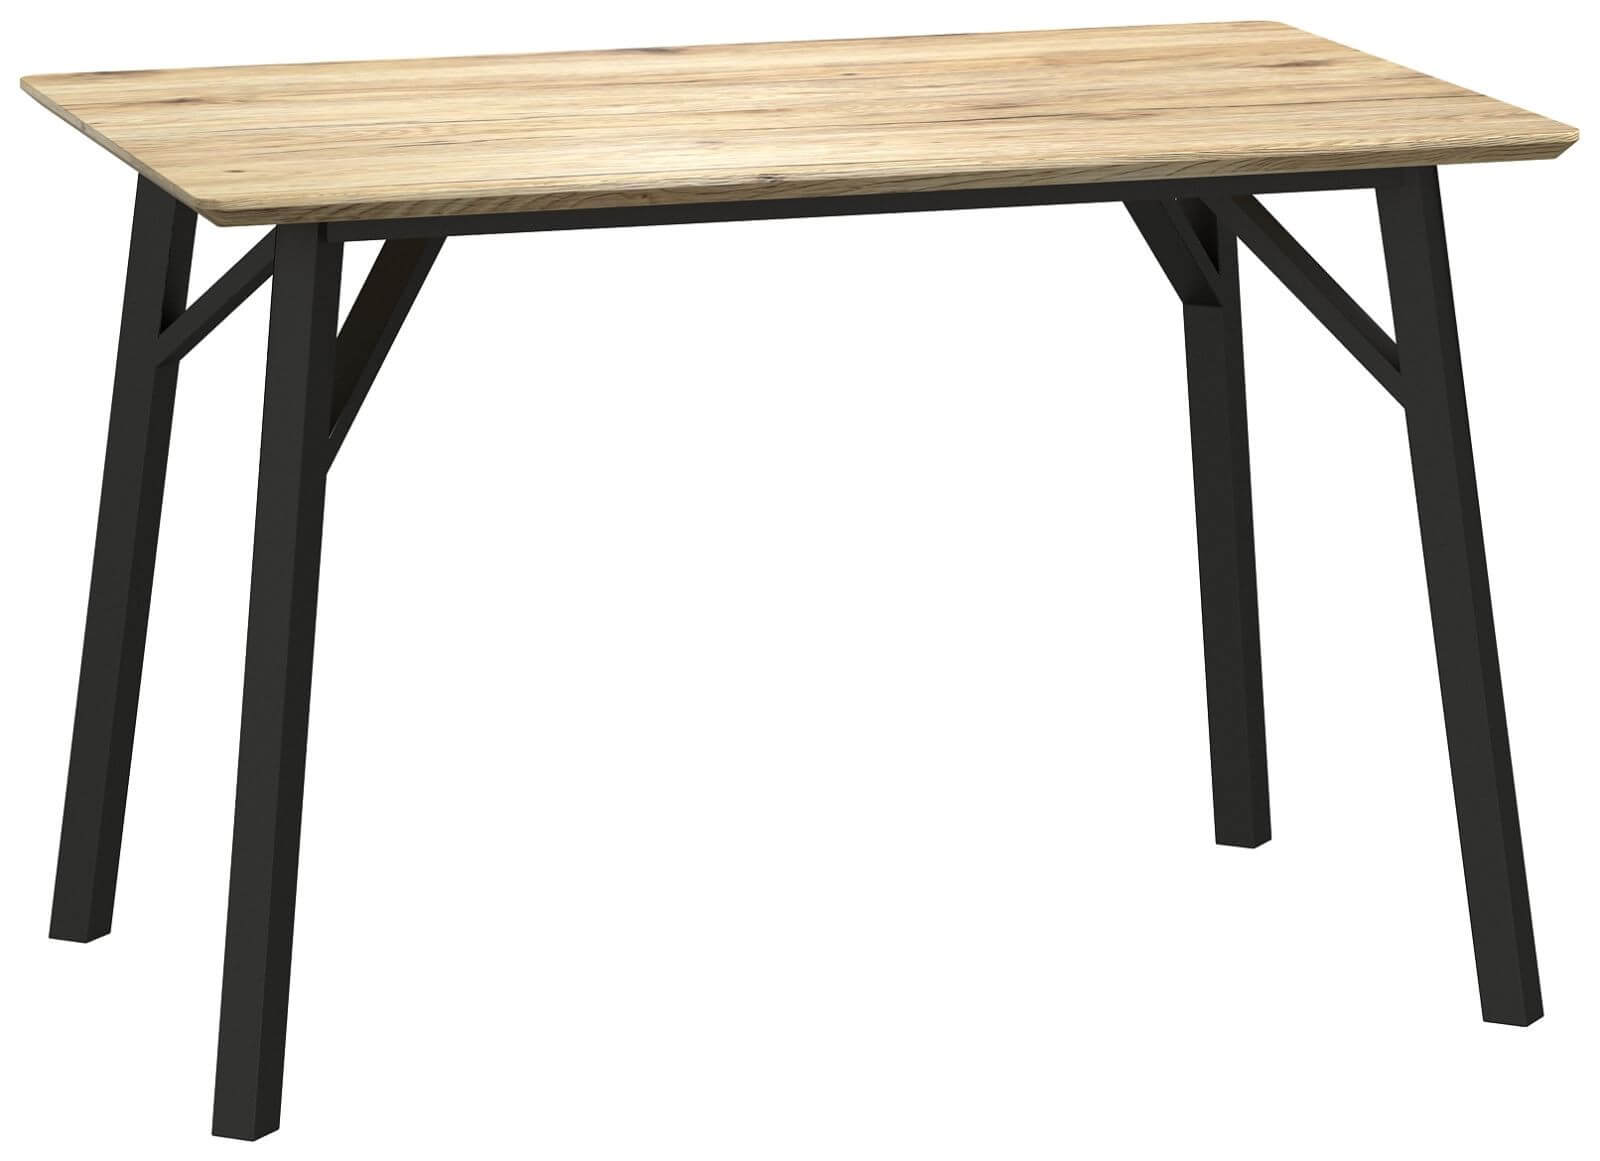 Showing image for Detroit dining table - rectangular